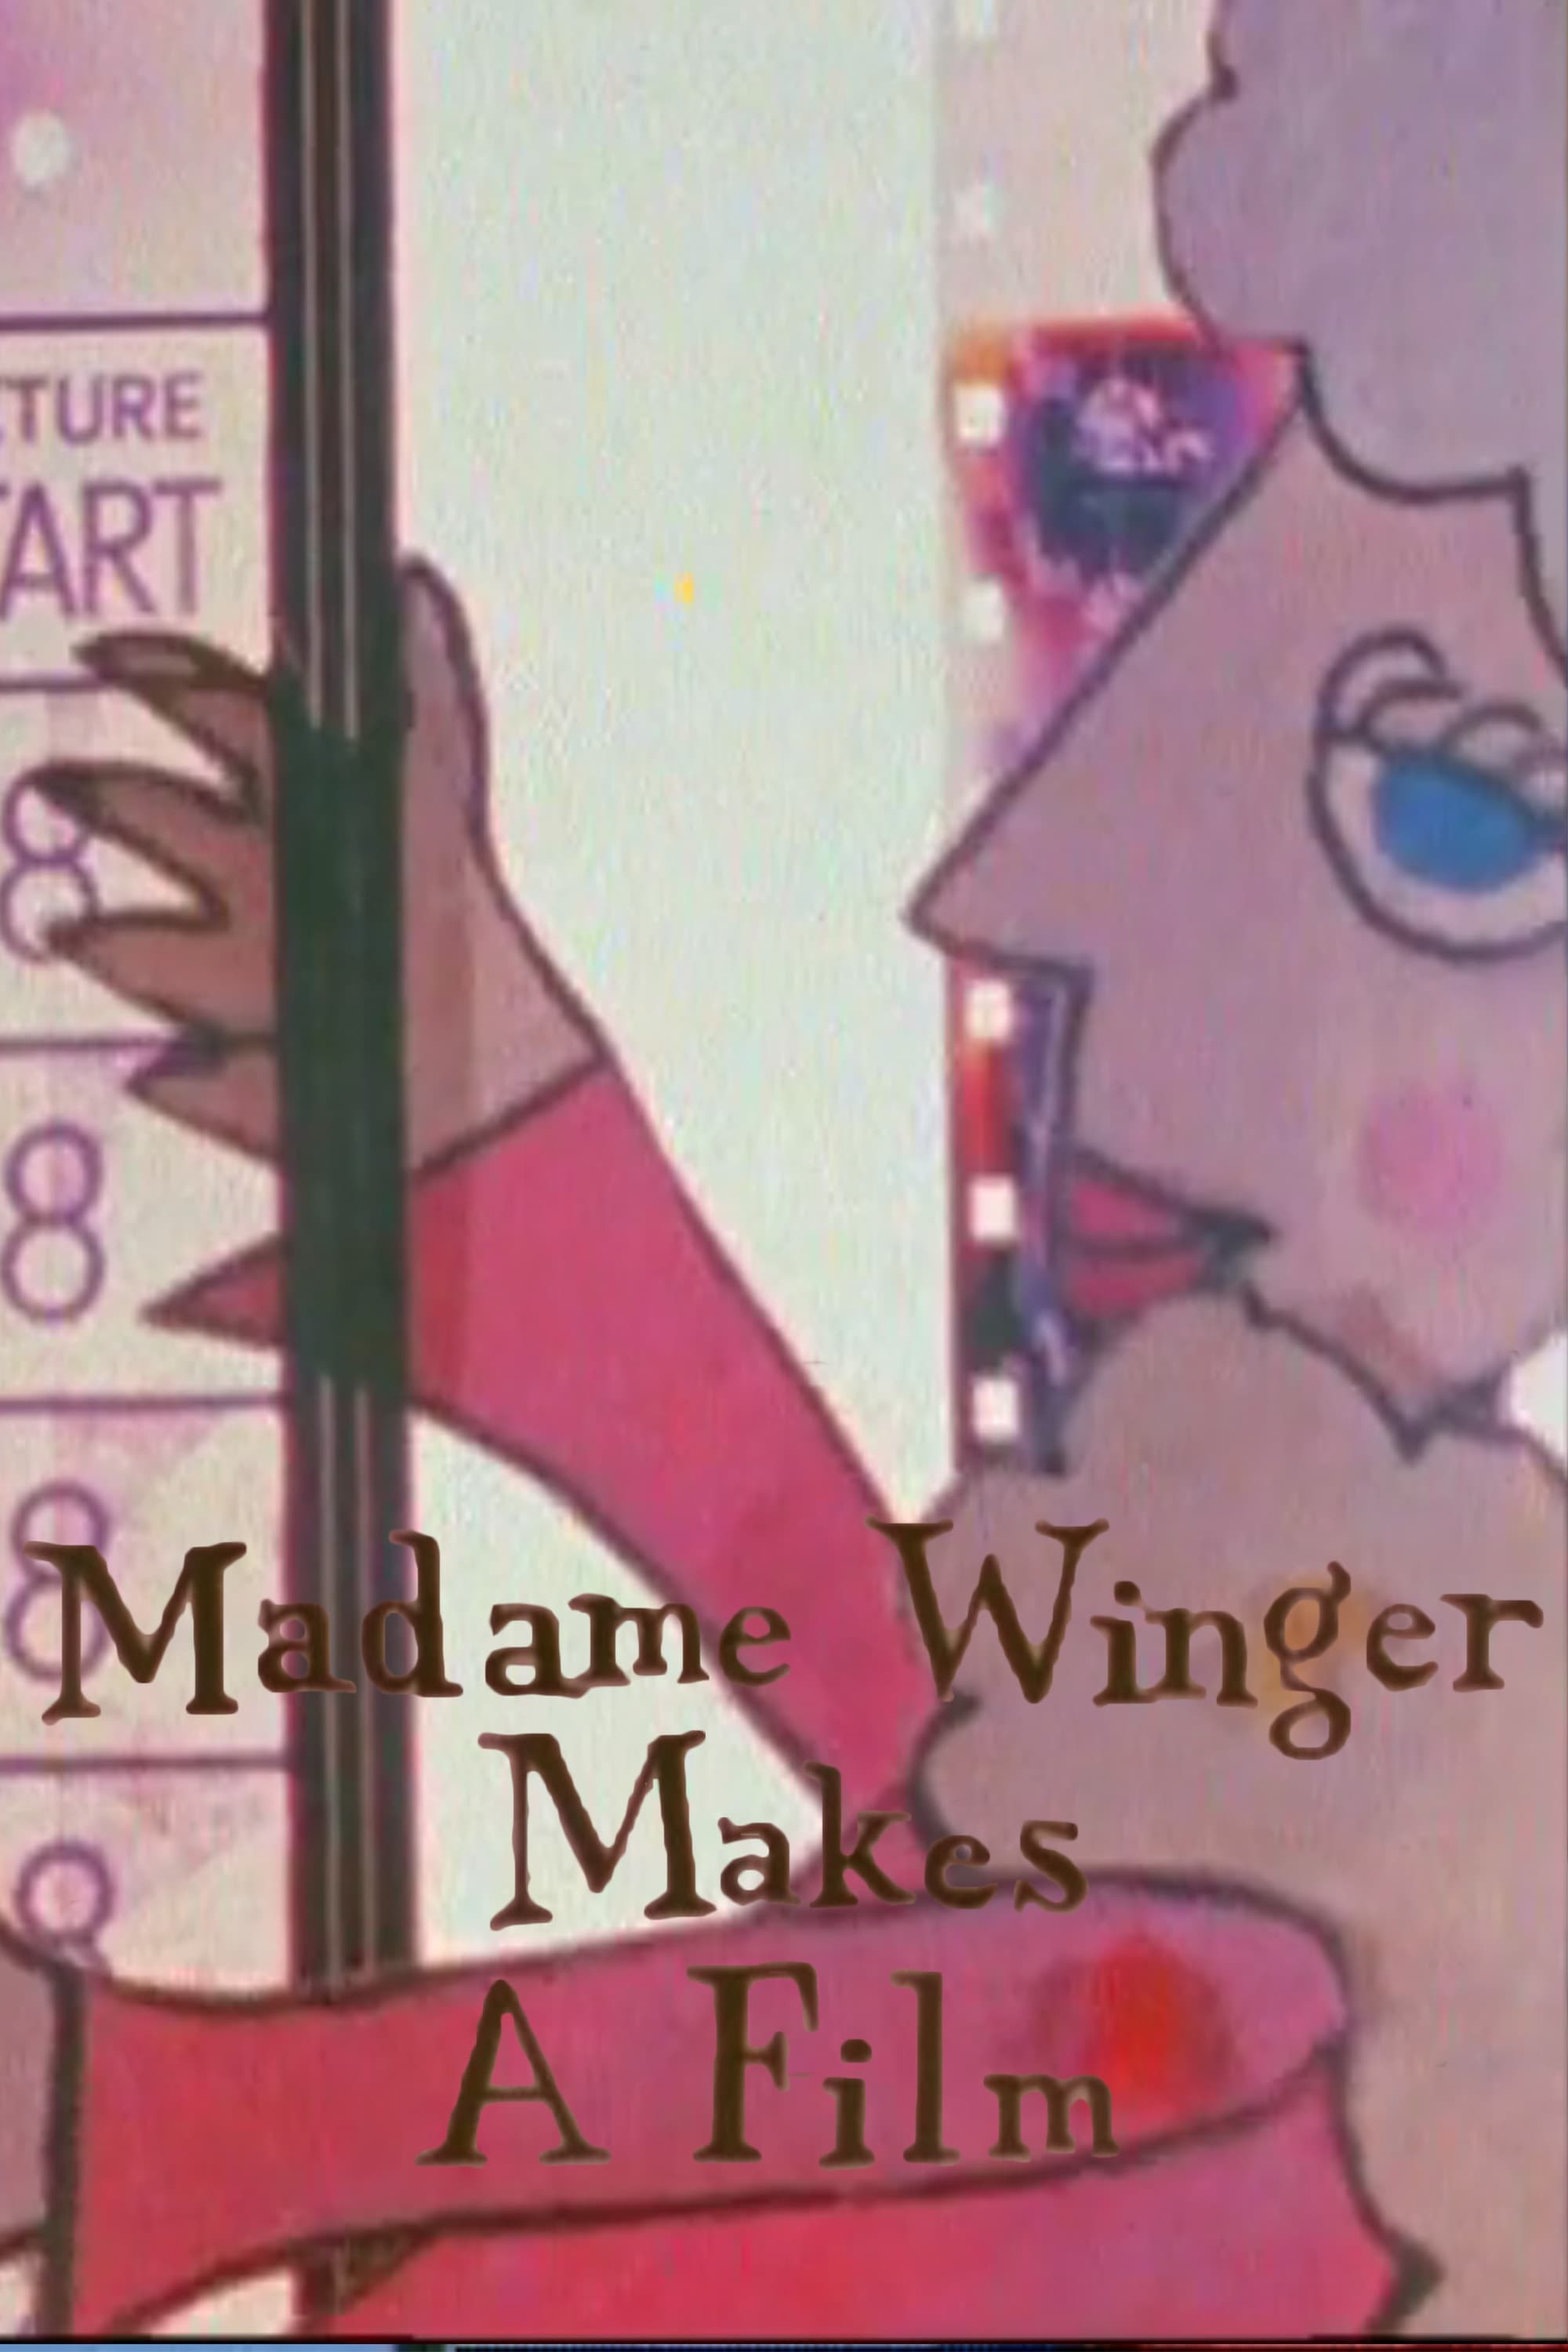 Madame Winger Makes a Film: A Survival Guide for the 21st Century